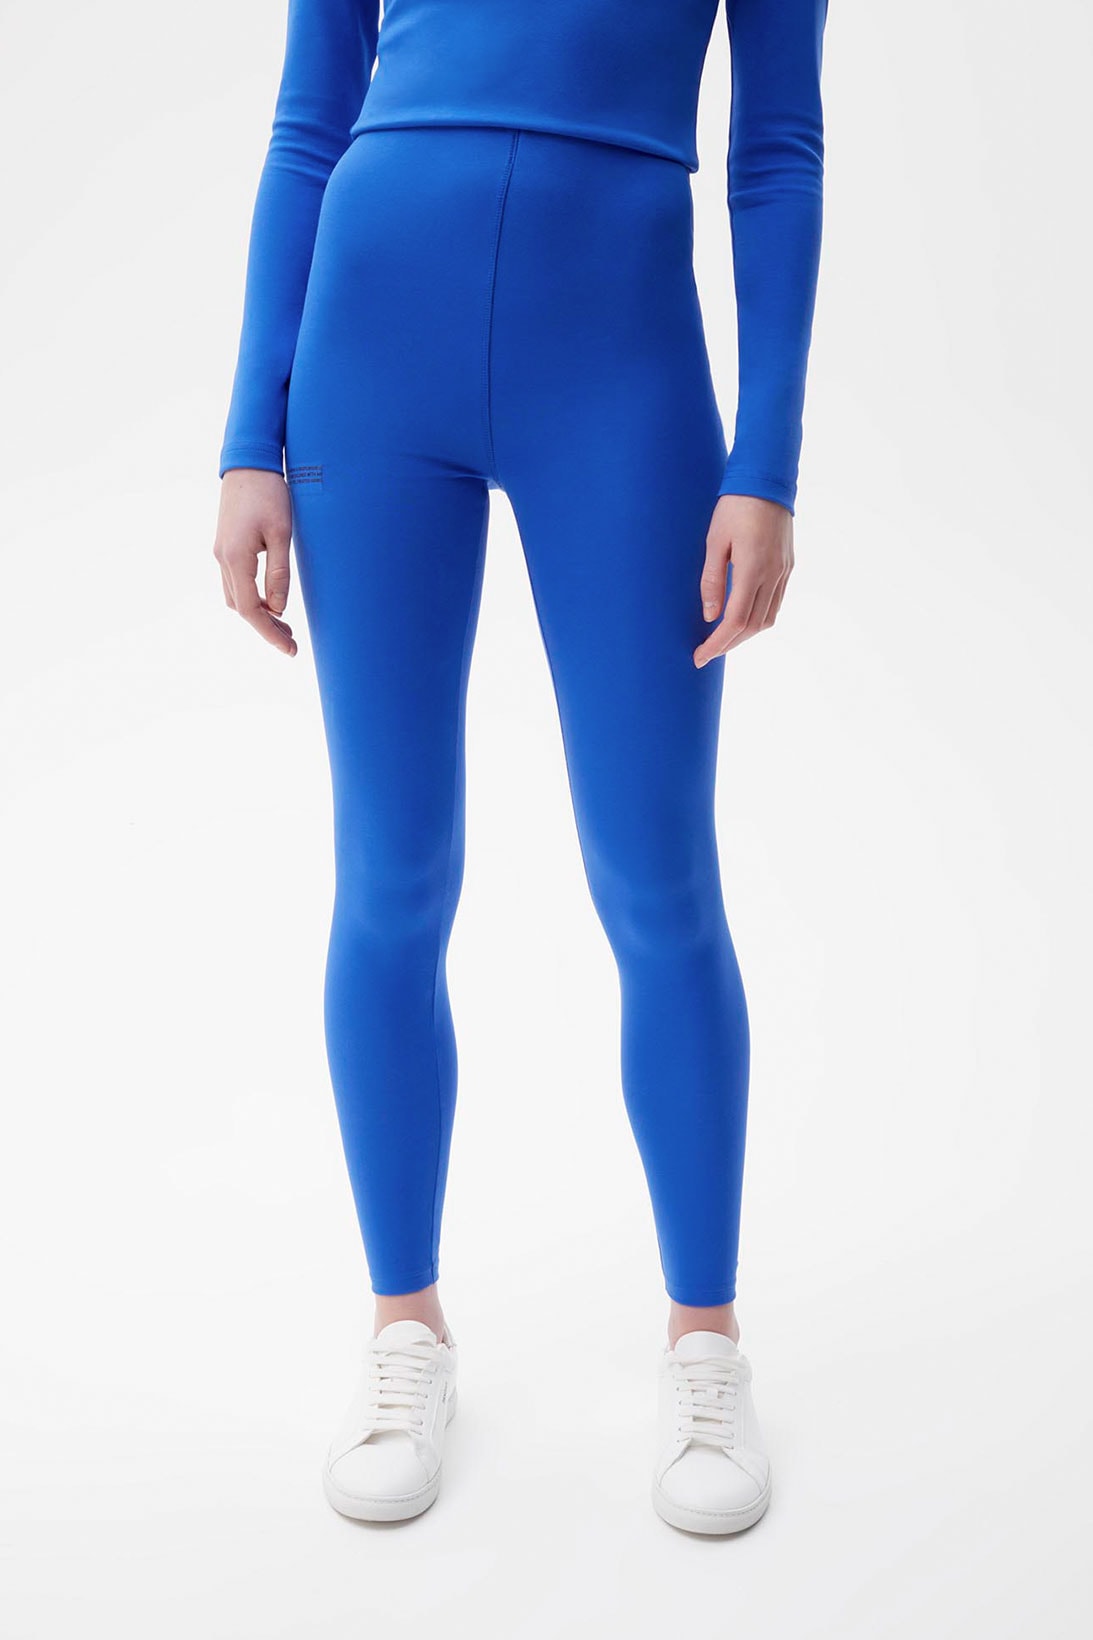 pangaia roica stretch athleisure sustainable collection turtleneck top leggings blue